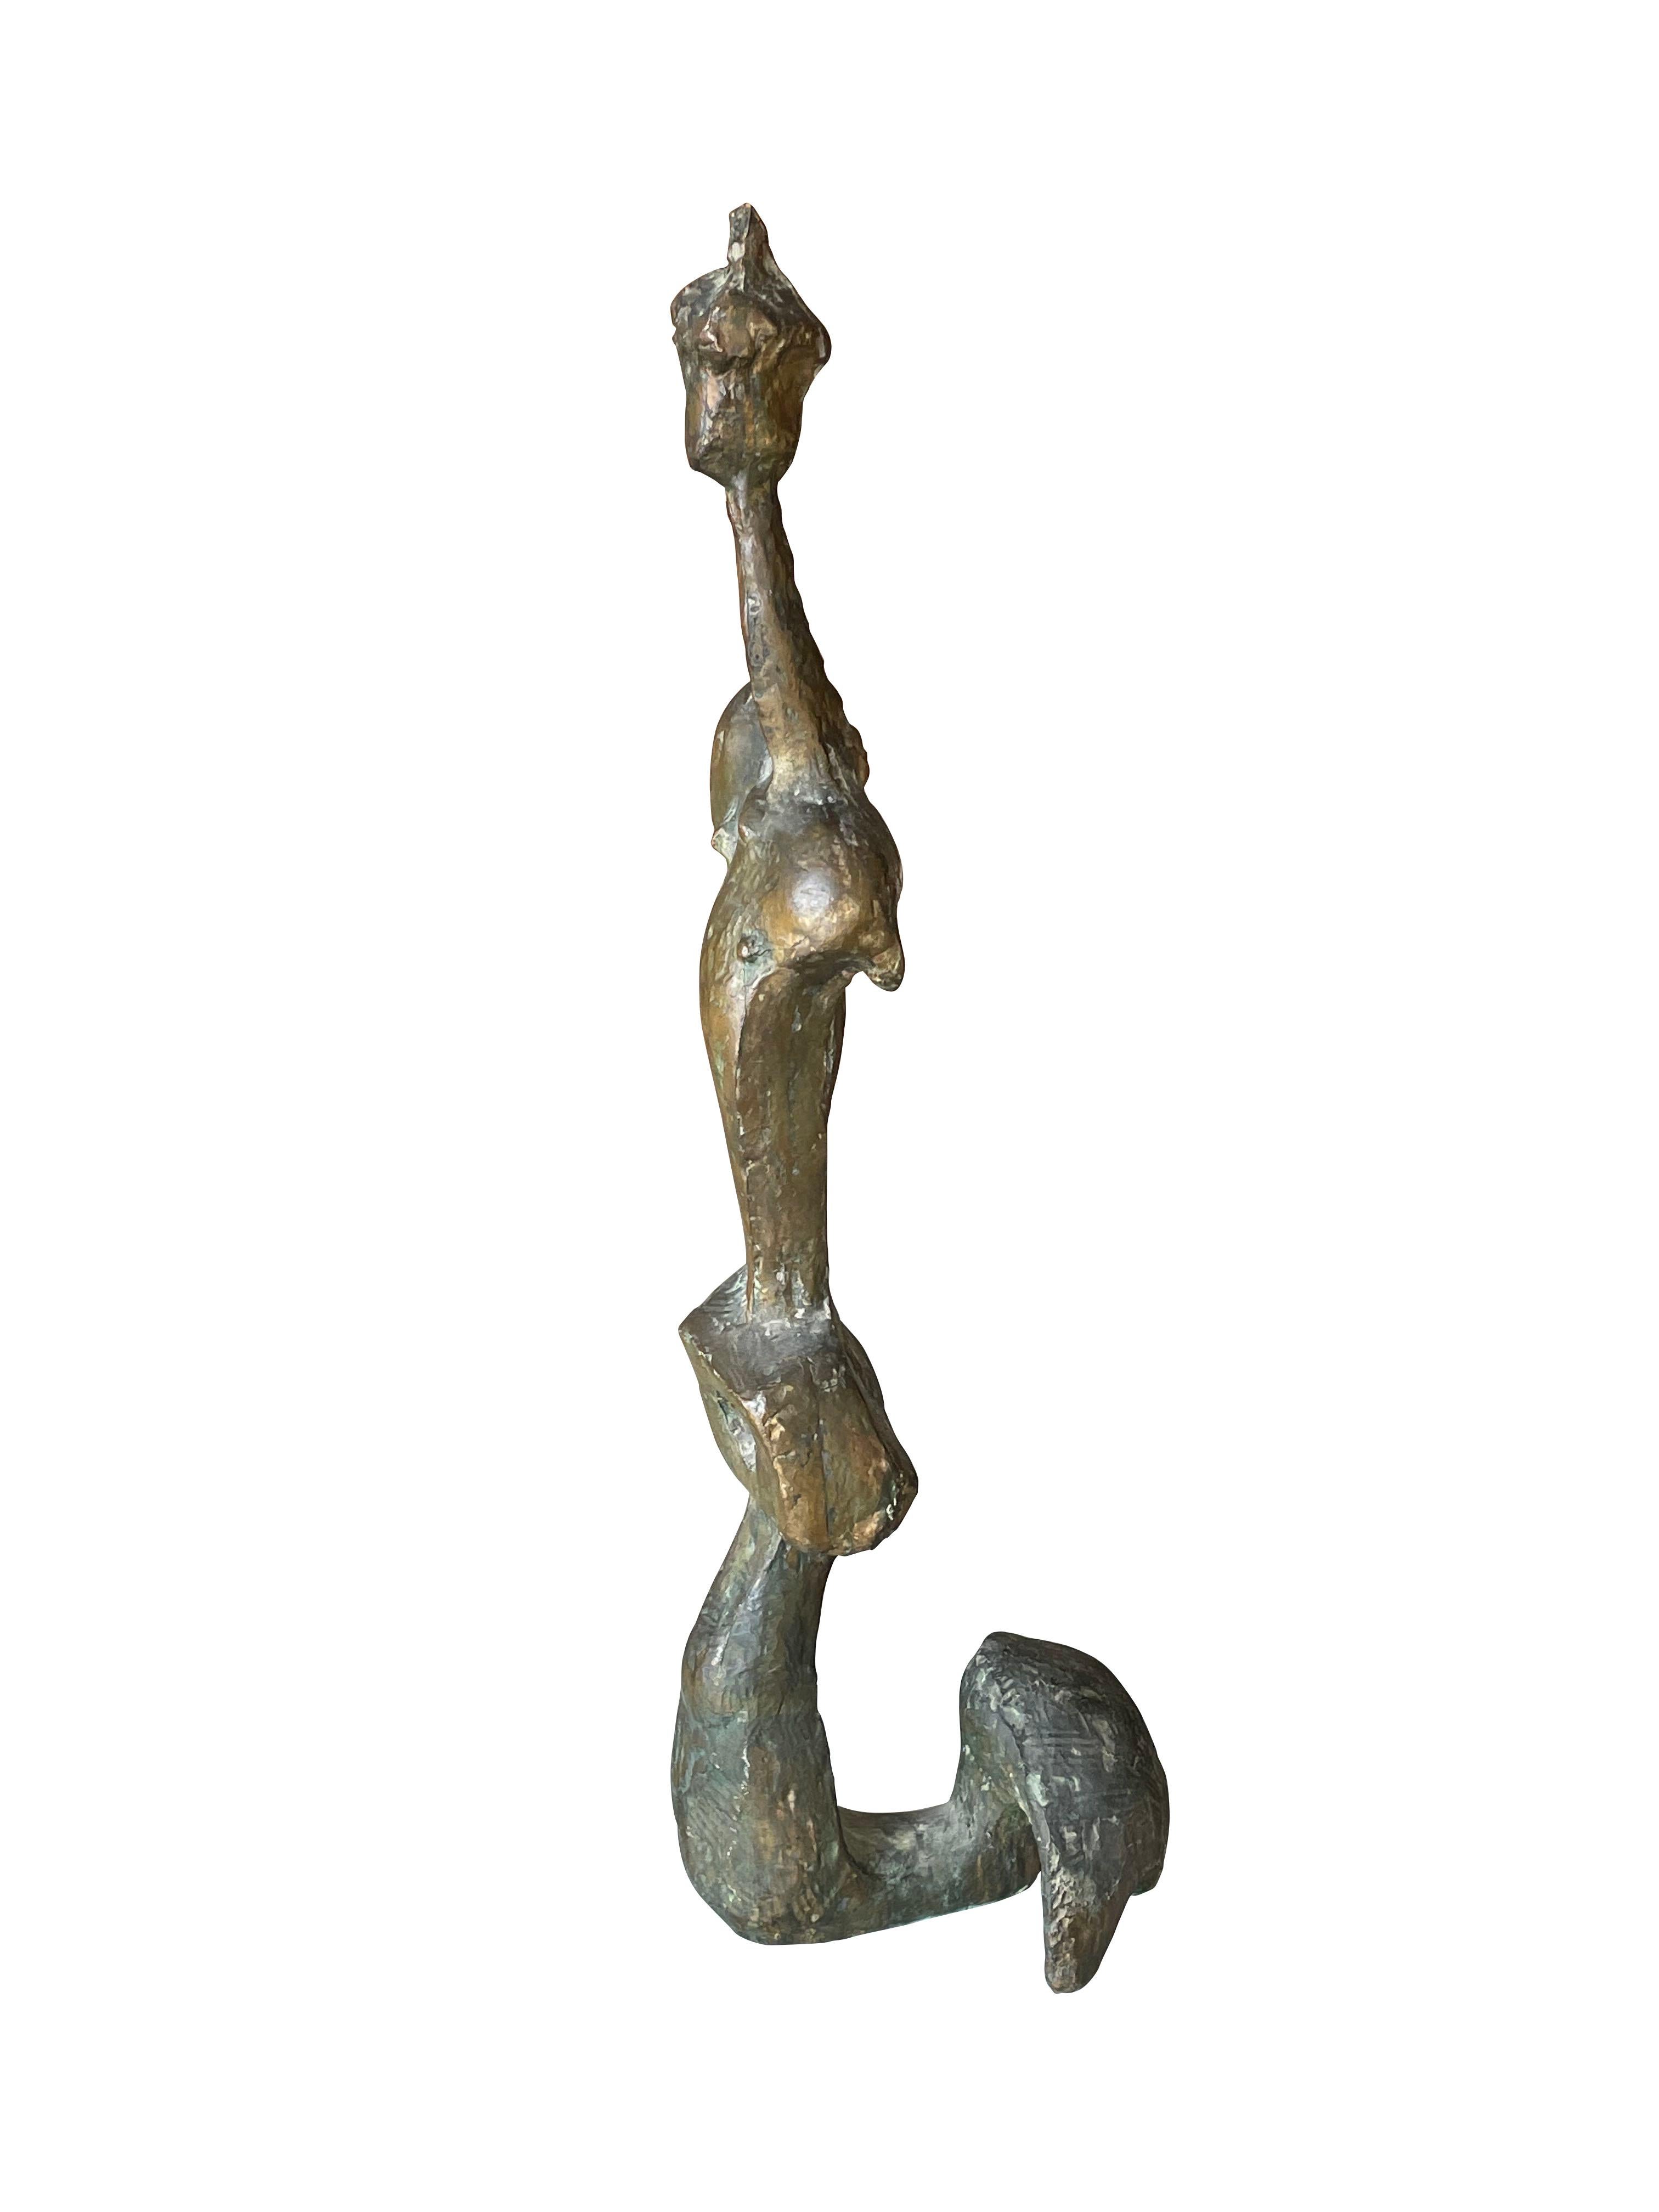 Signed V Chende in 1968 French bronze sculpture.
Free standing abstract figure.
